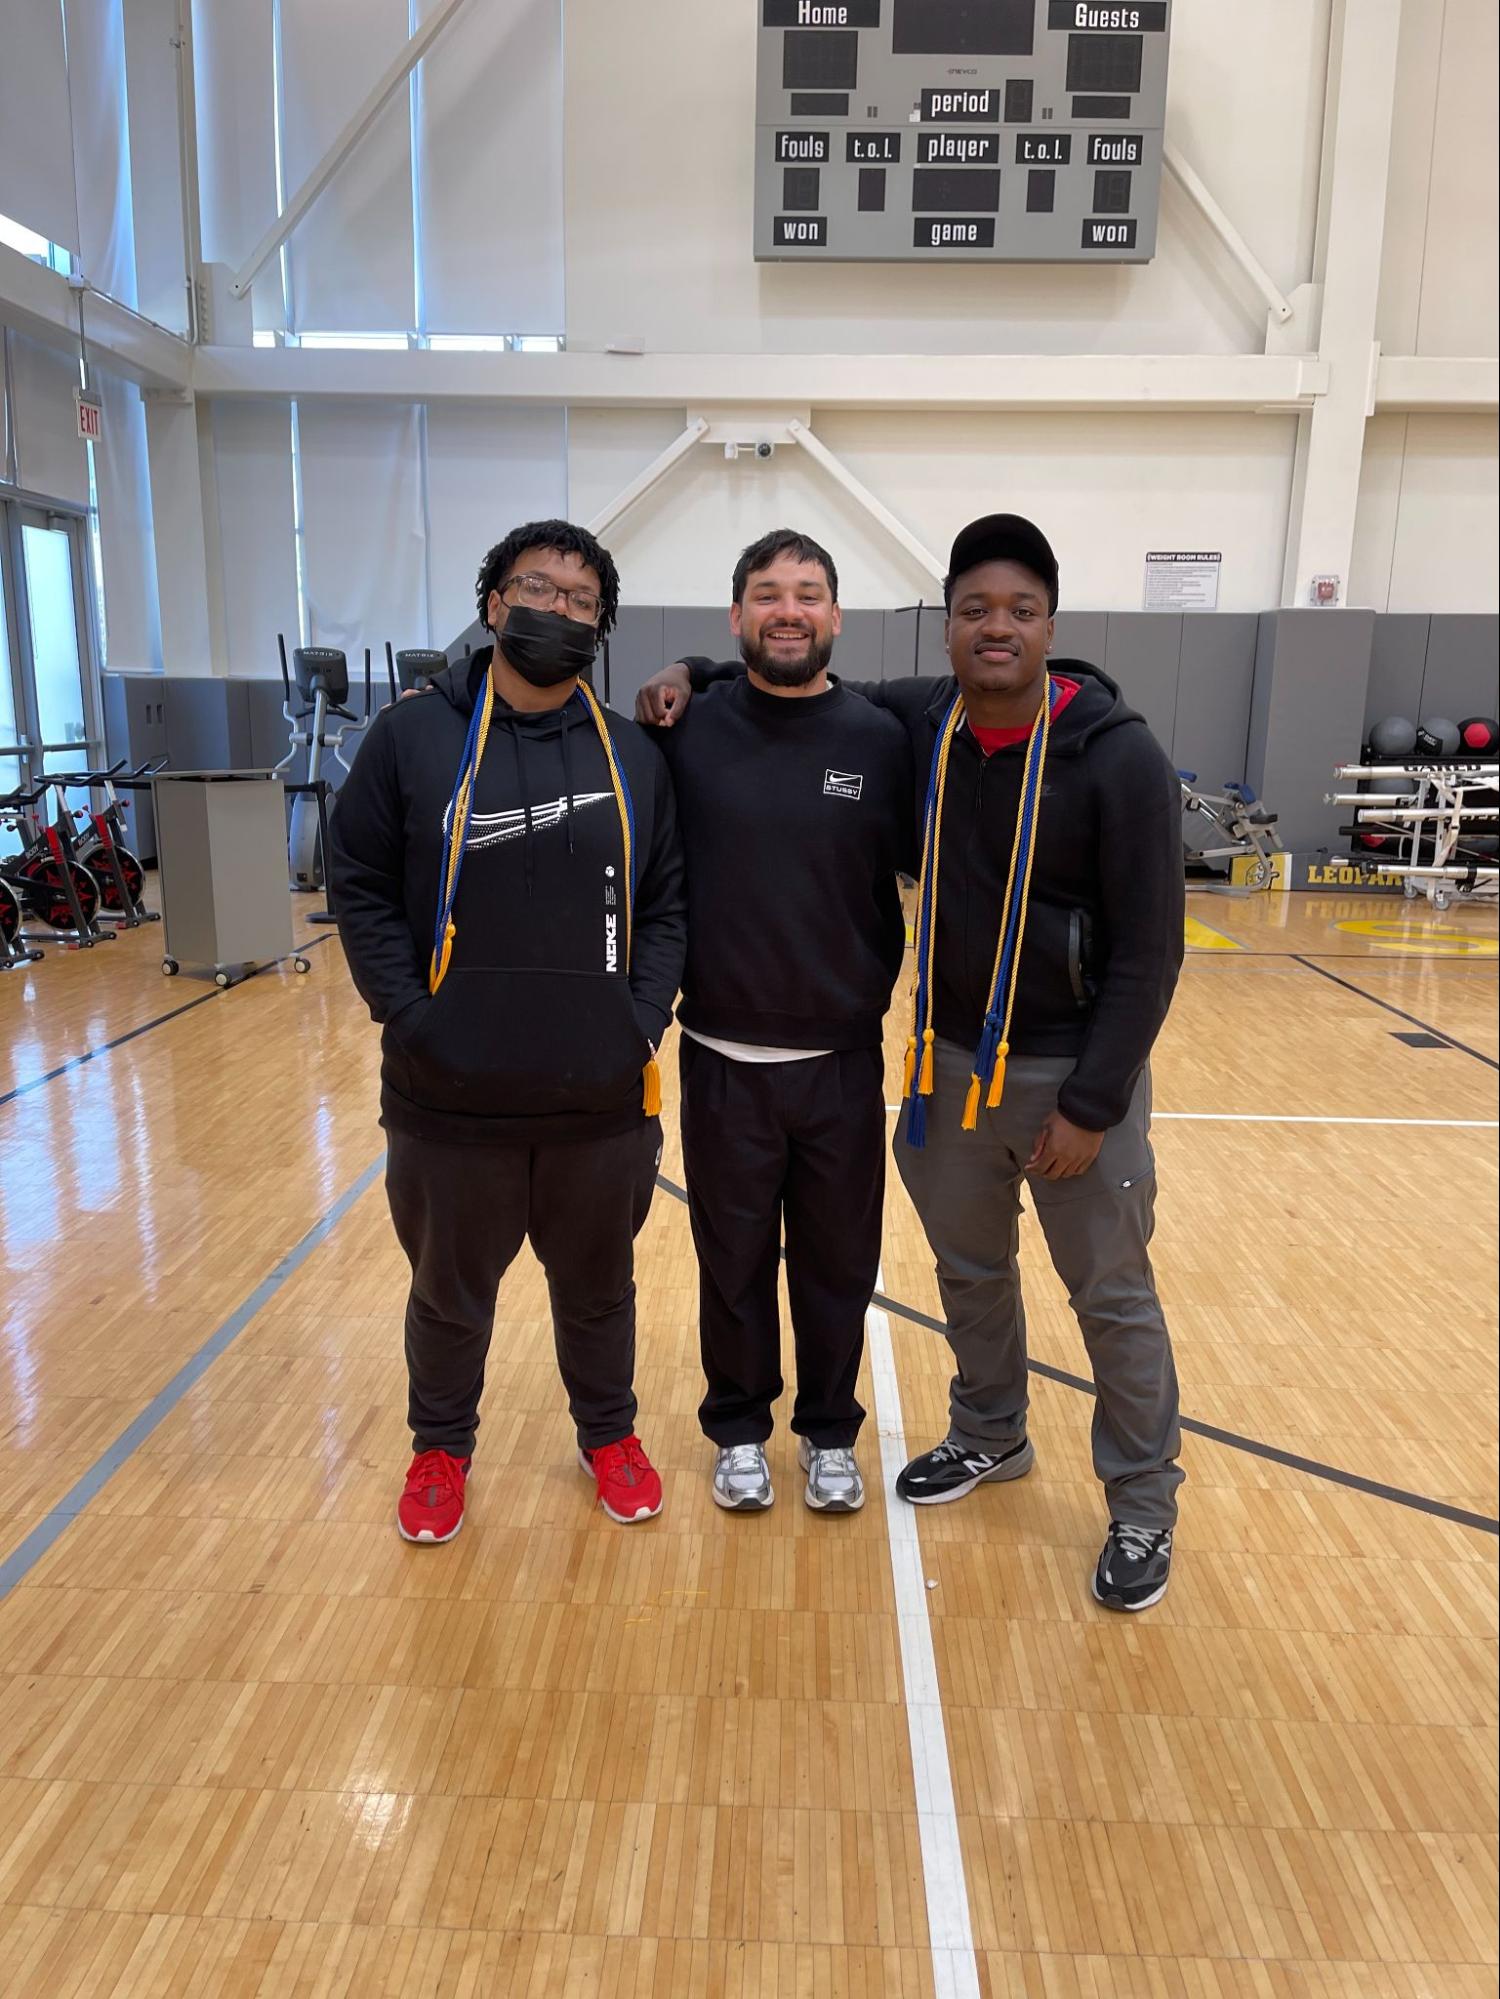 Walter and Deandre stand with their basketball coach, Jose Arteaga, in the Mansueto High School gym. The two boys are wearing graduation cords around their neck.